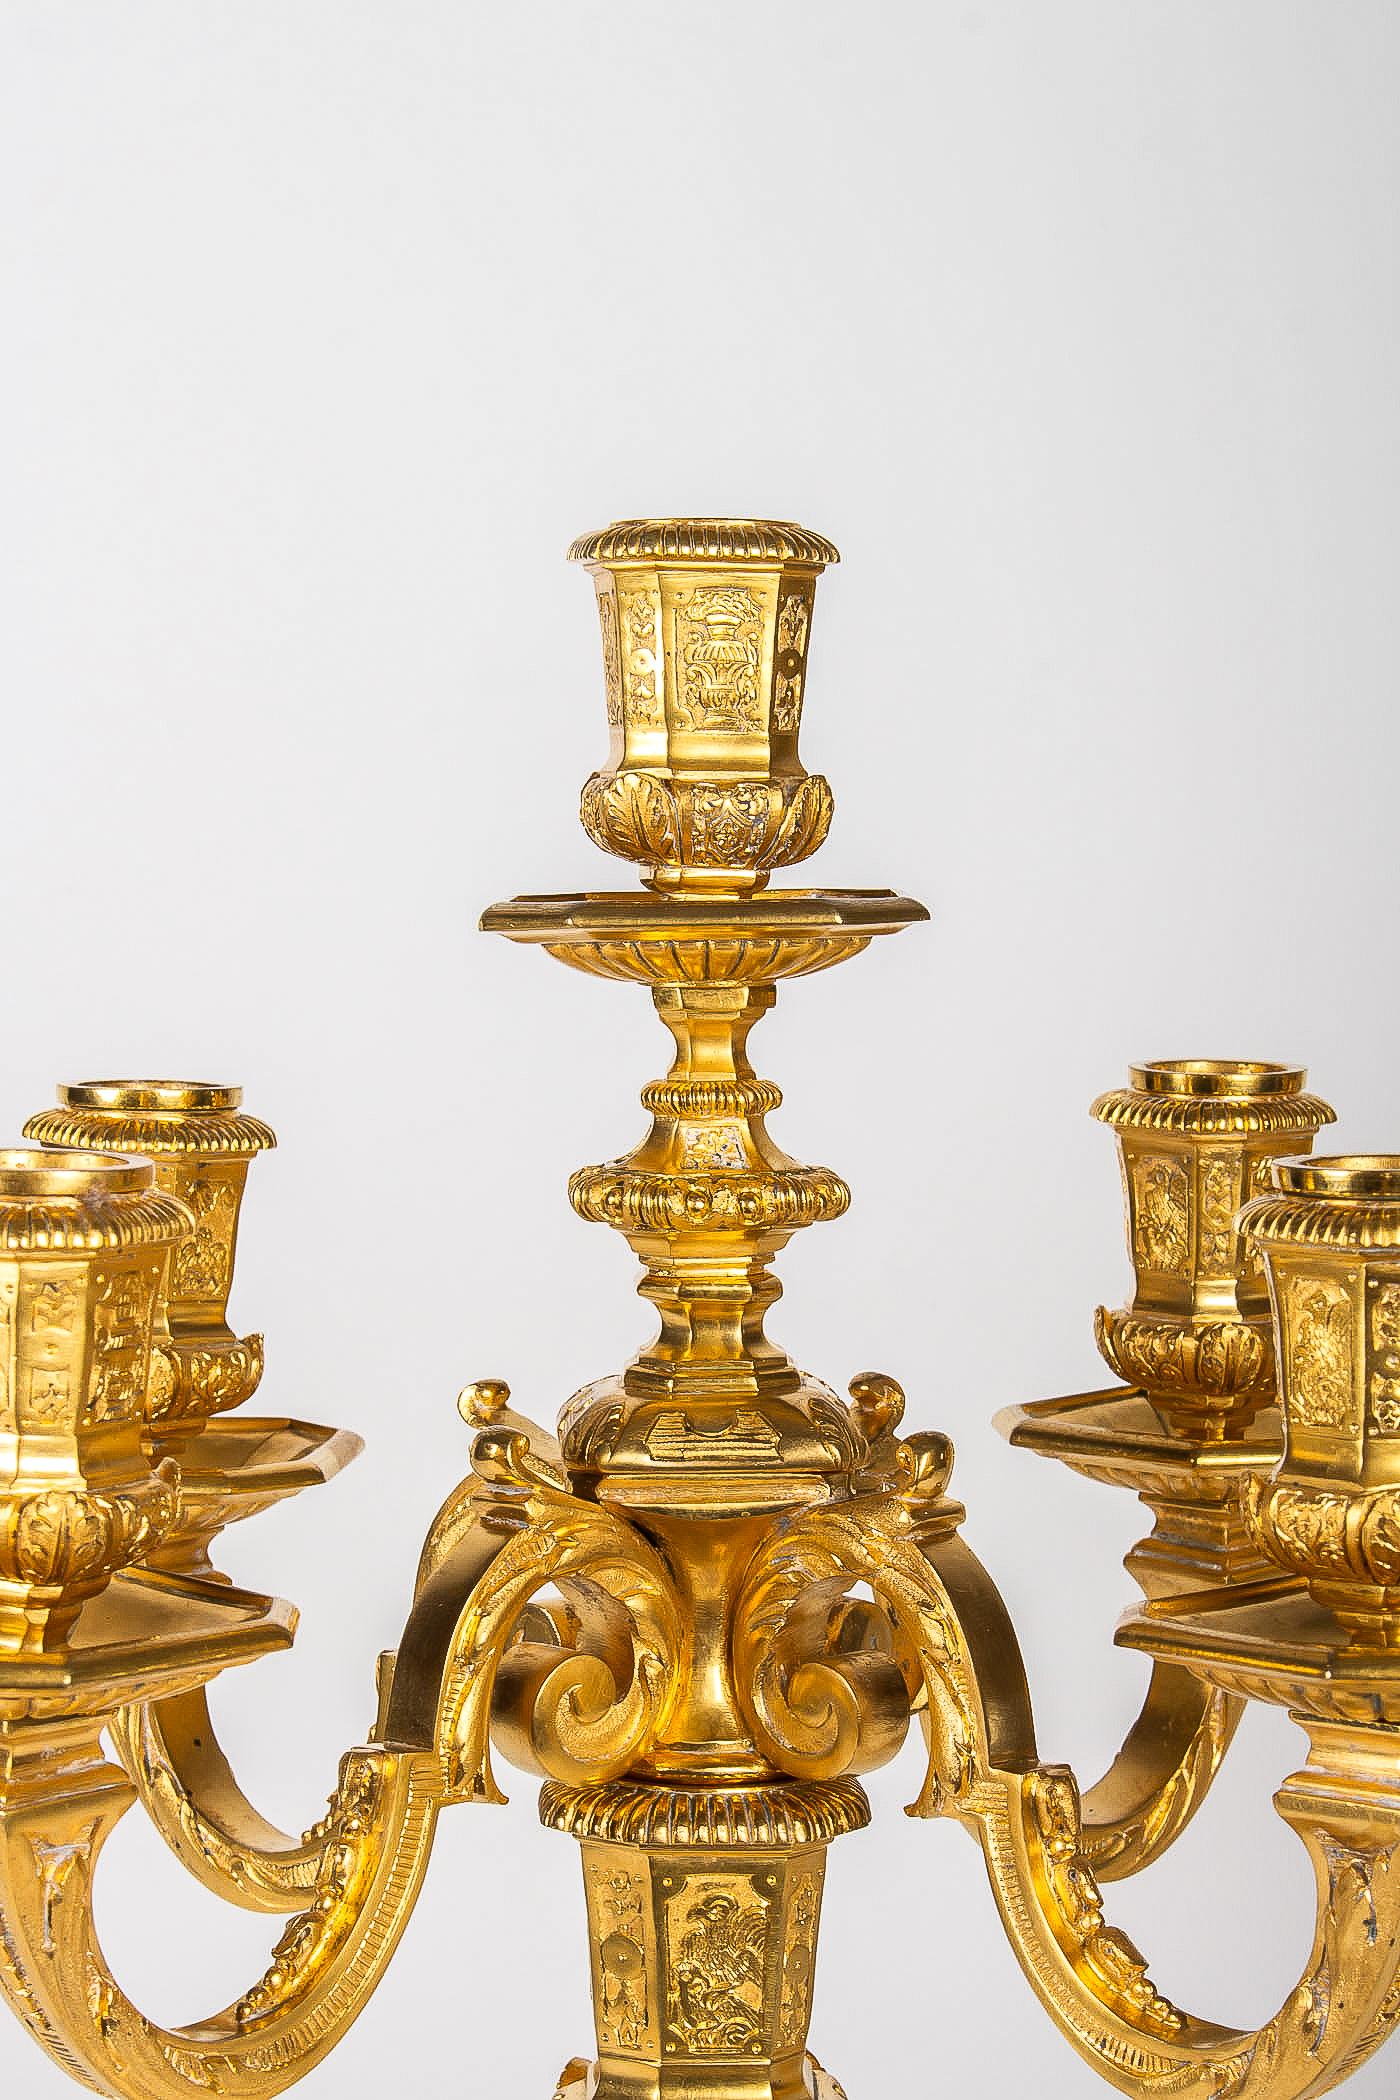 by H Voisenet, Large Pair of Louis XIV Style Ormolu Candelabras, circa 1880-1900 3